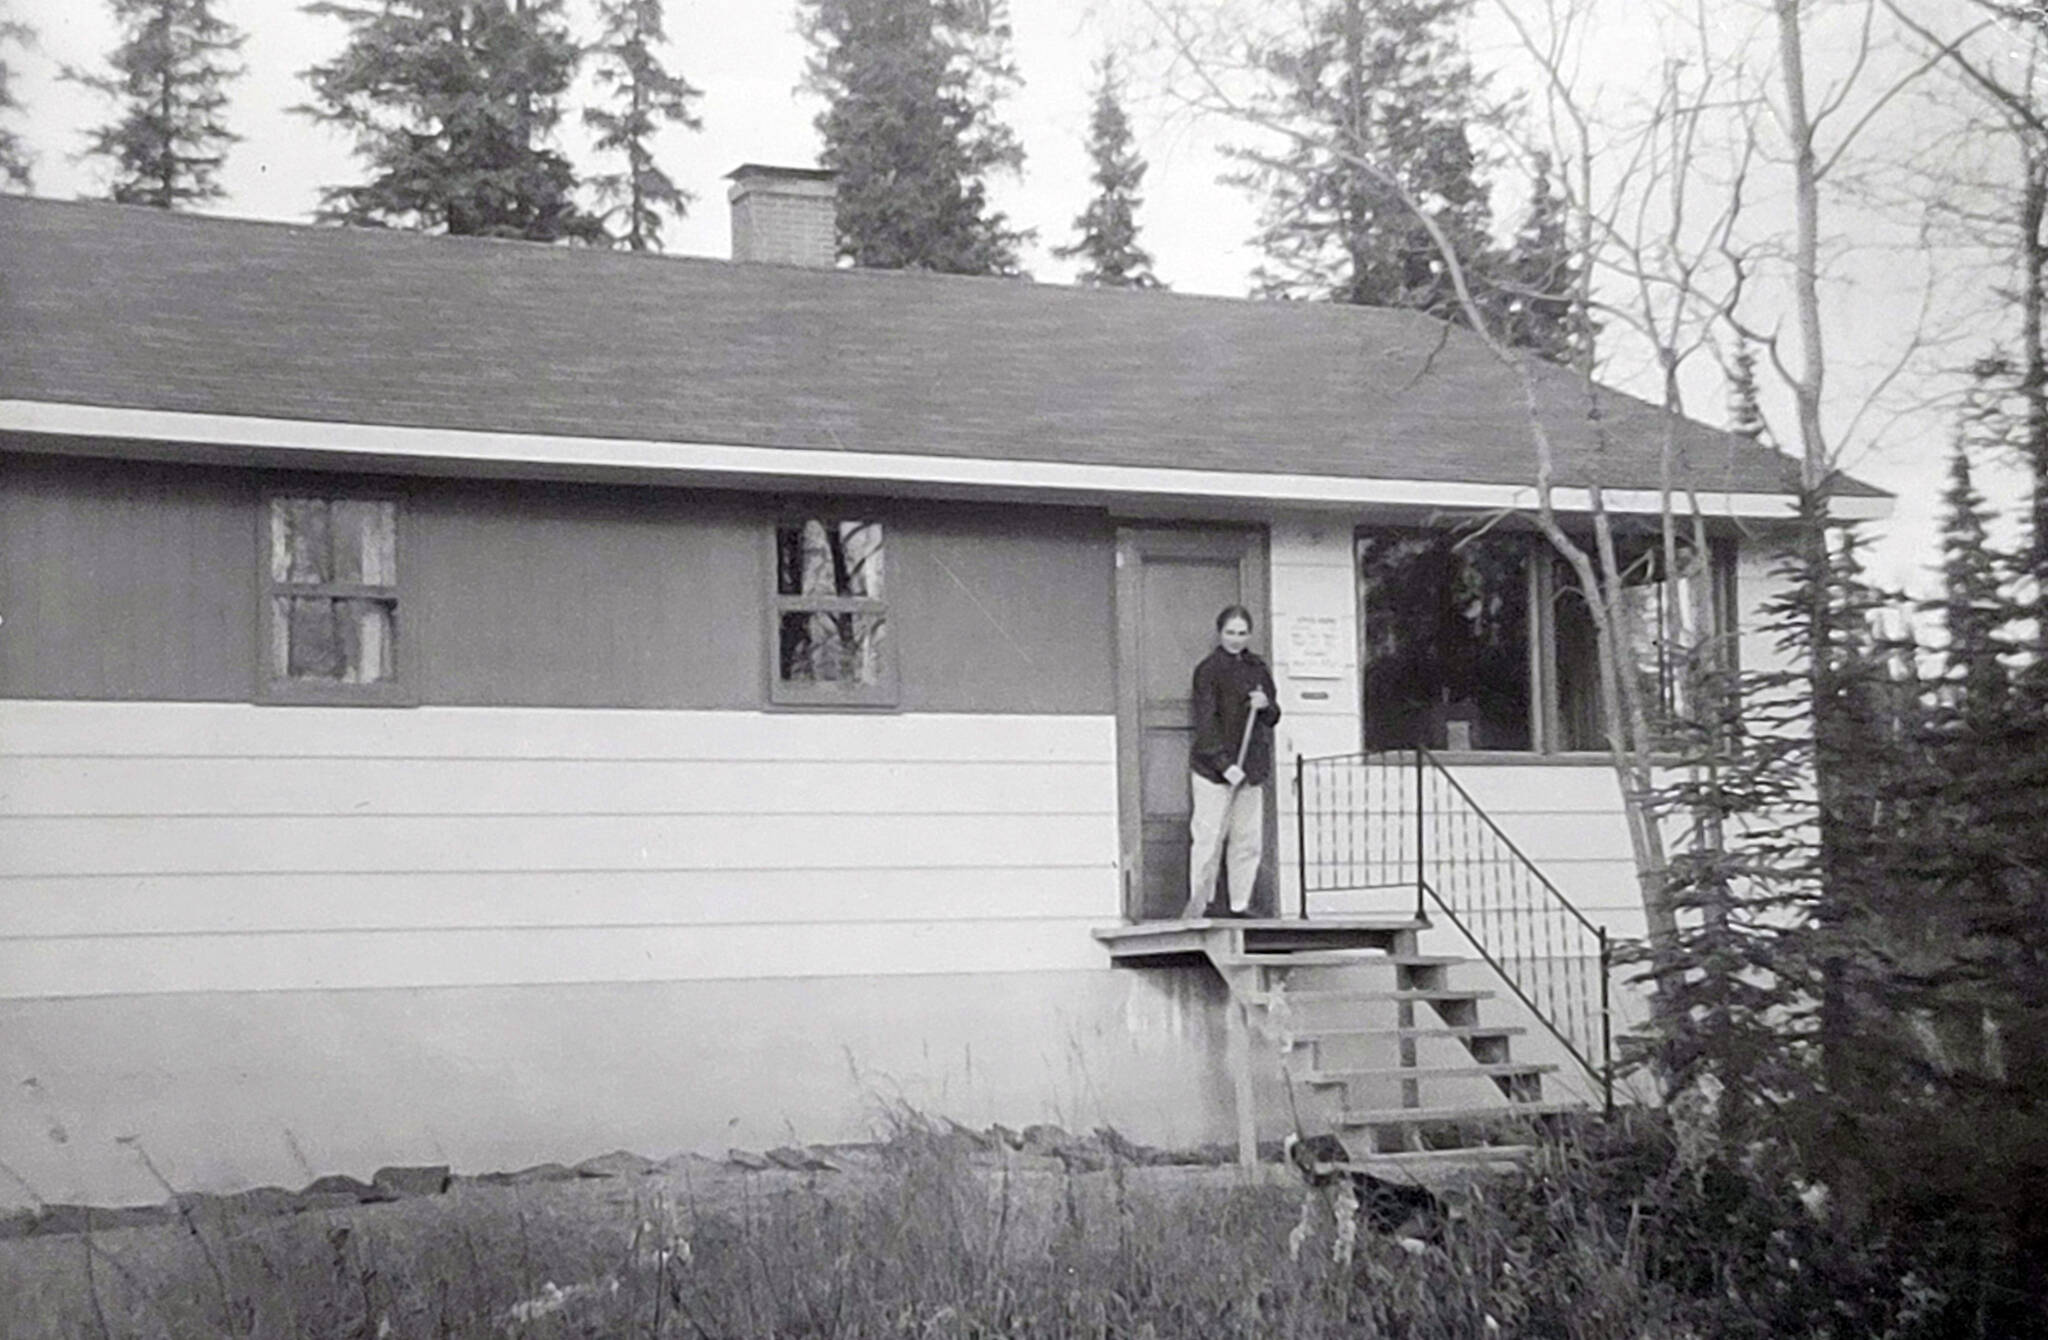 Dr. Marian Goble sweeps her clinic porch on McCollum Drive, circa 1959-60. (Photo courtesy of Ben and Marian Goble)